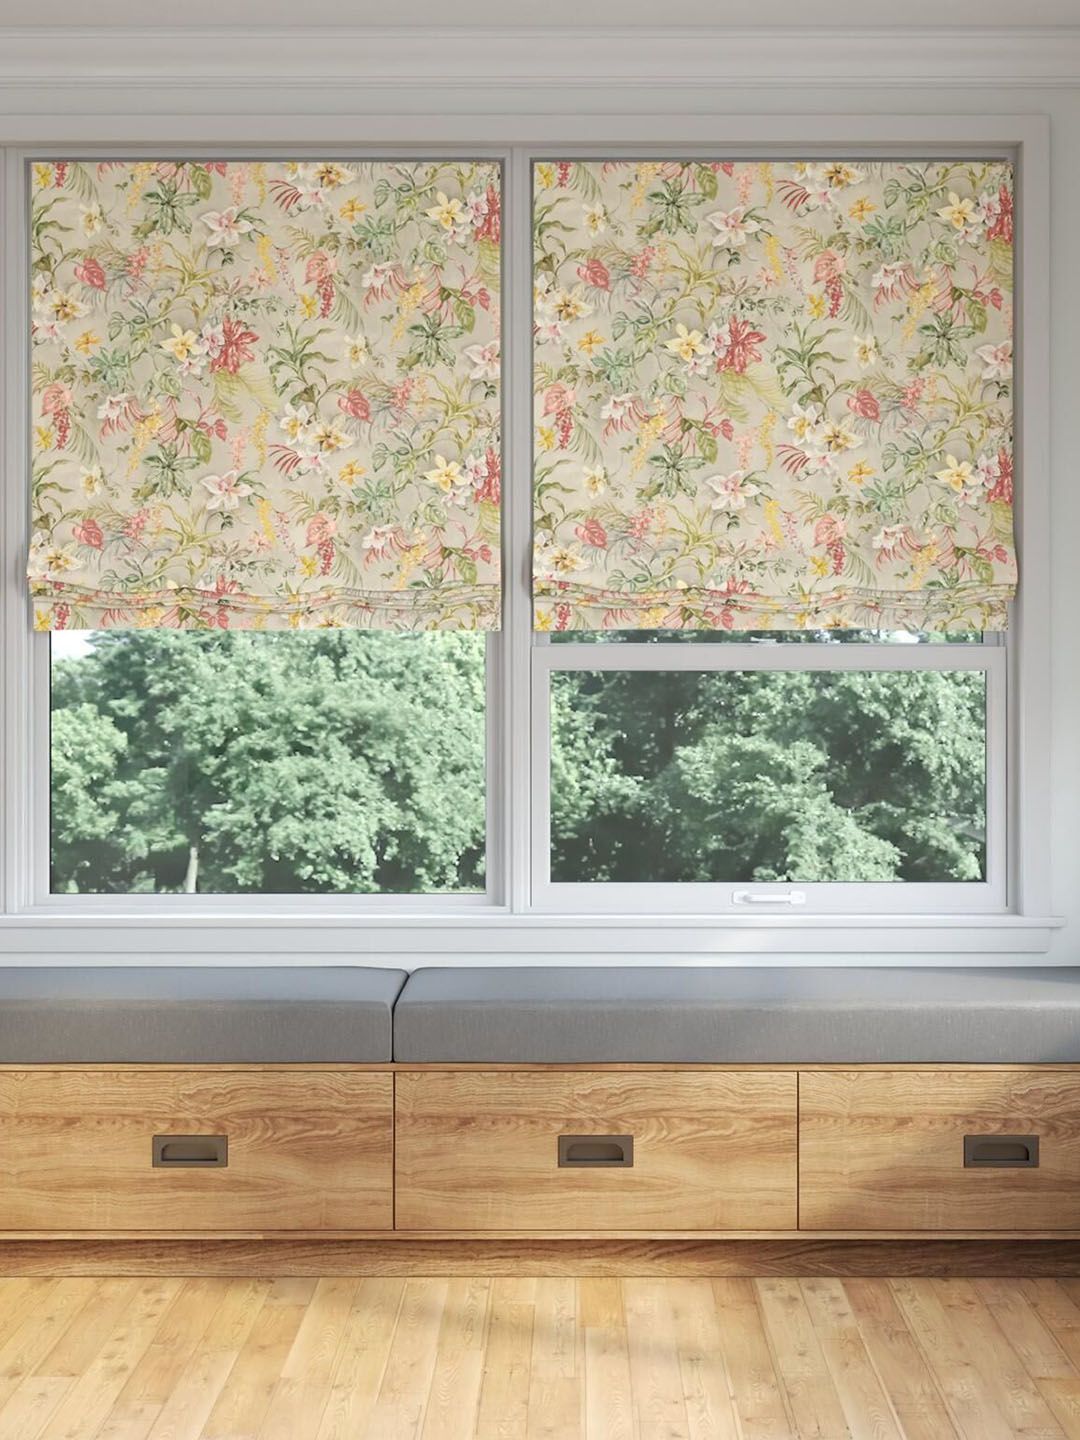 Floral printed Roman blinds by Acacia Fabric hang over a bay window in a living room